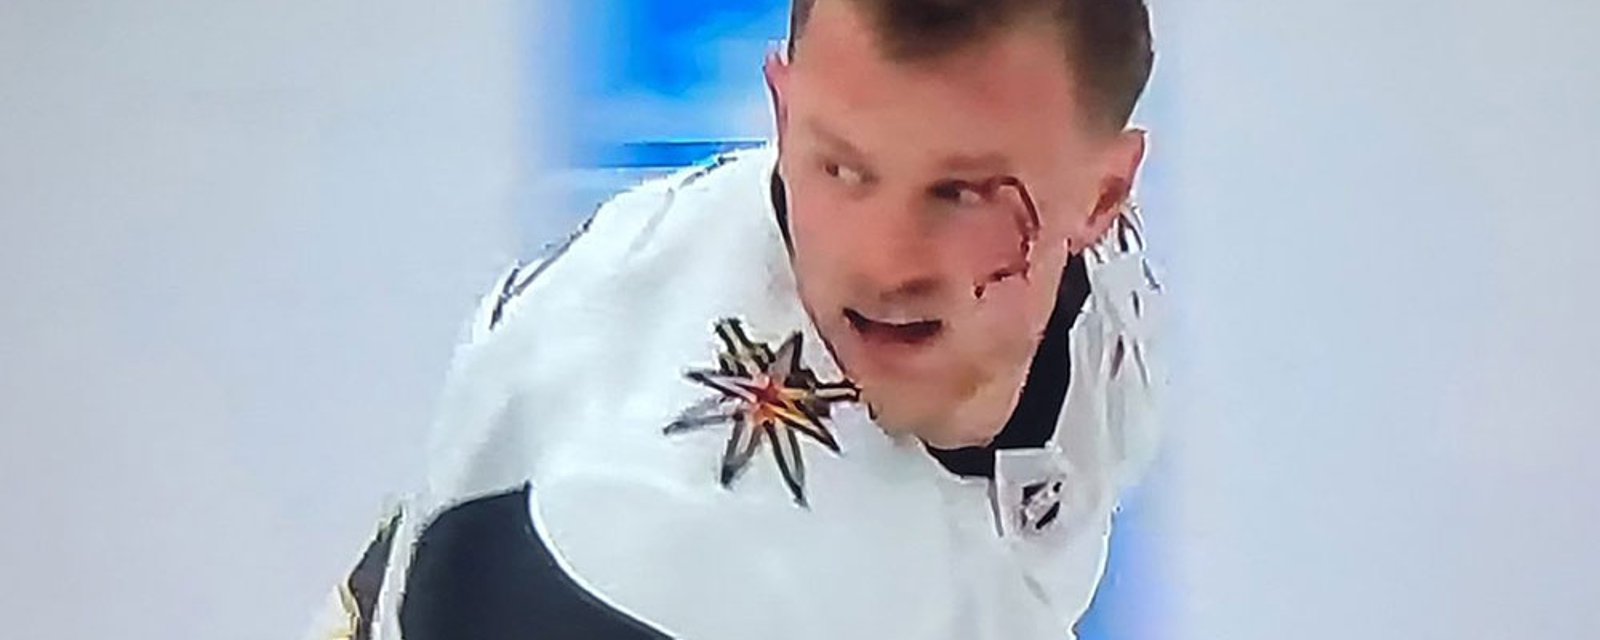 Eichel takes a shot to the face, leaves the game leaking badly all over the ice